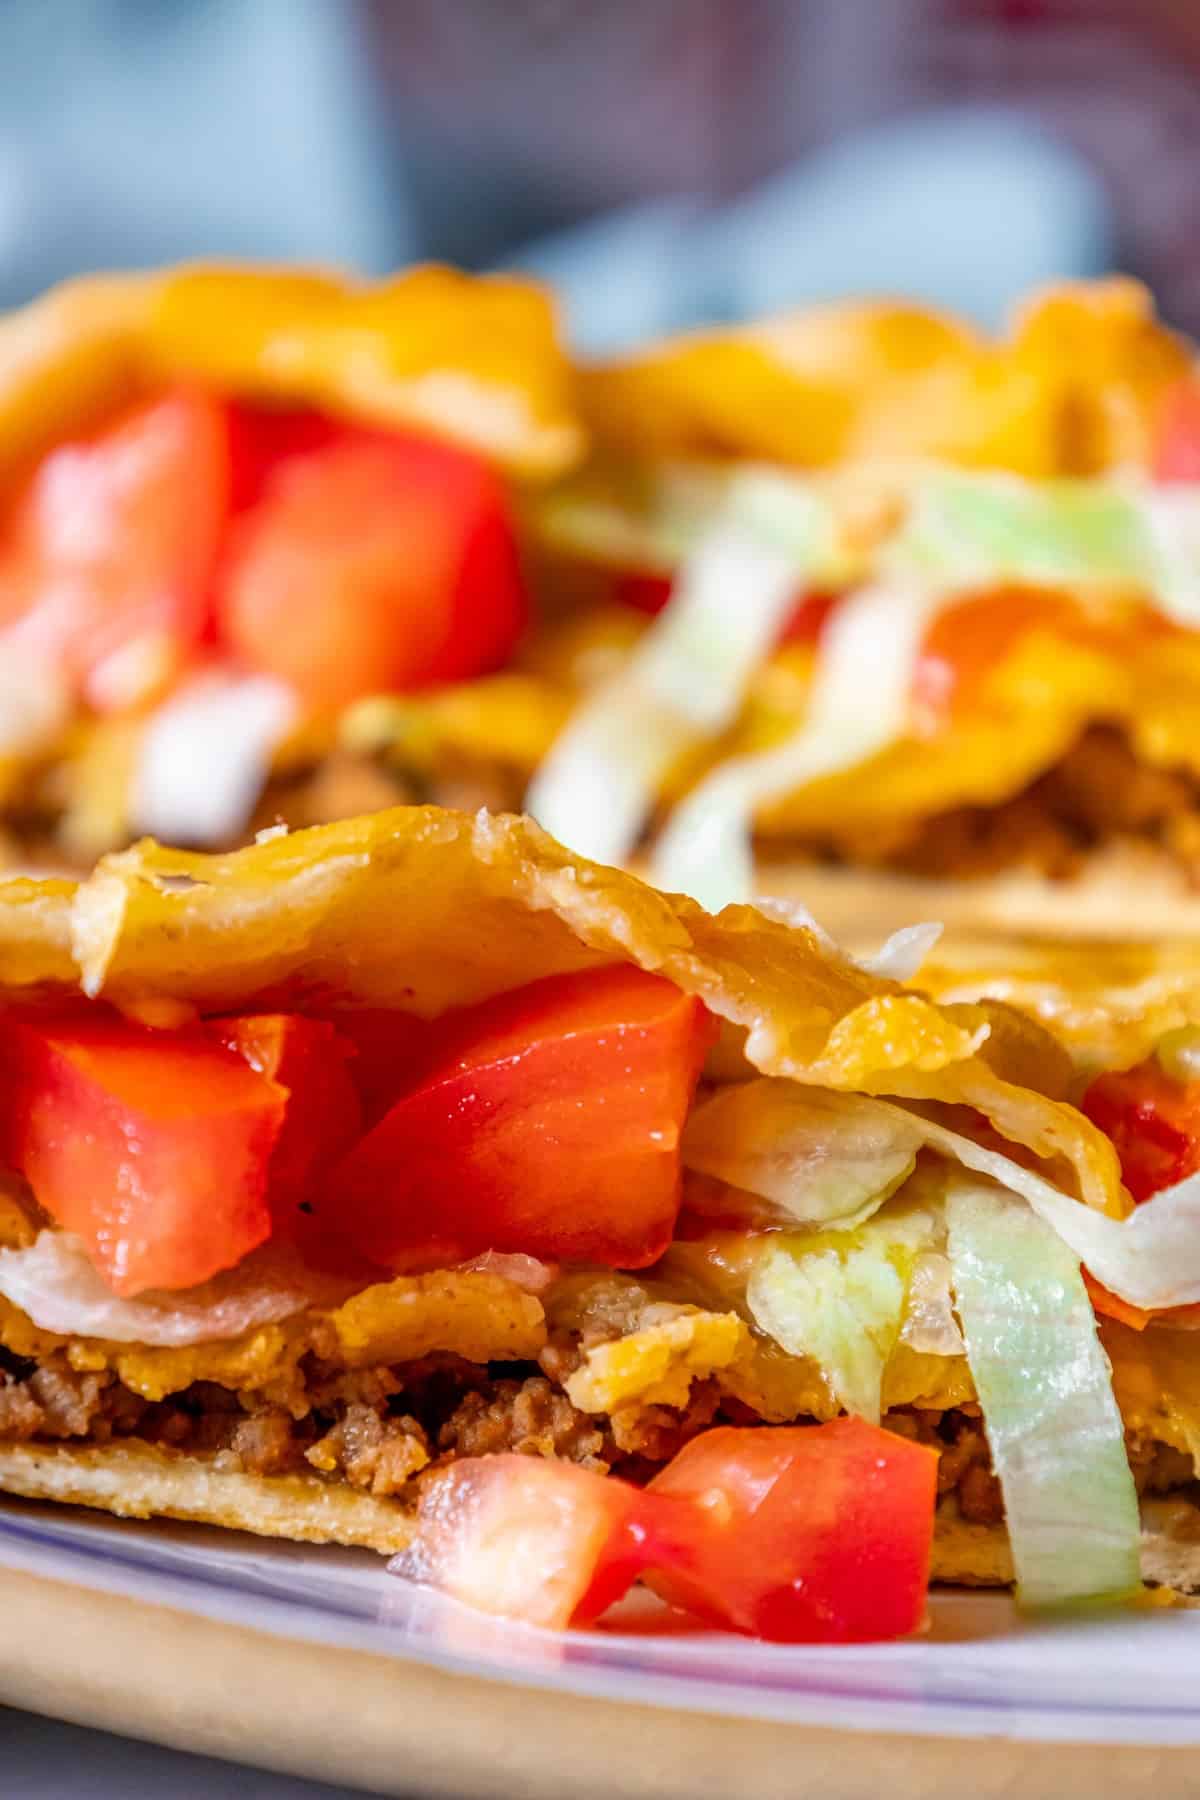 A homemade plate with two CrunchWrap tacos on it.